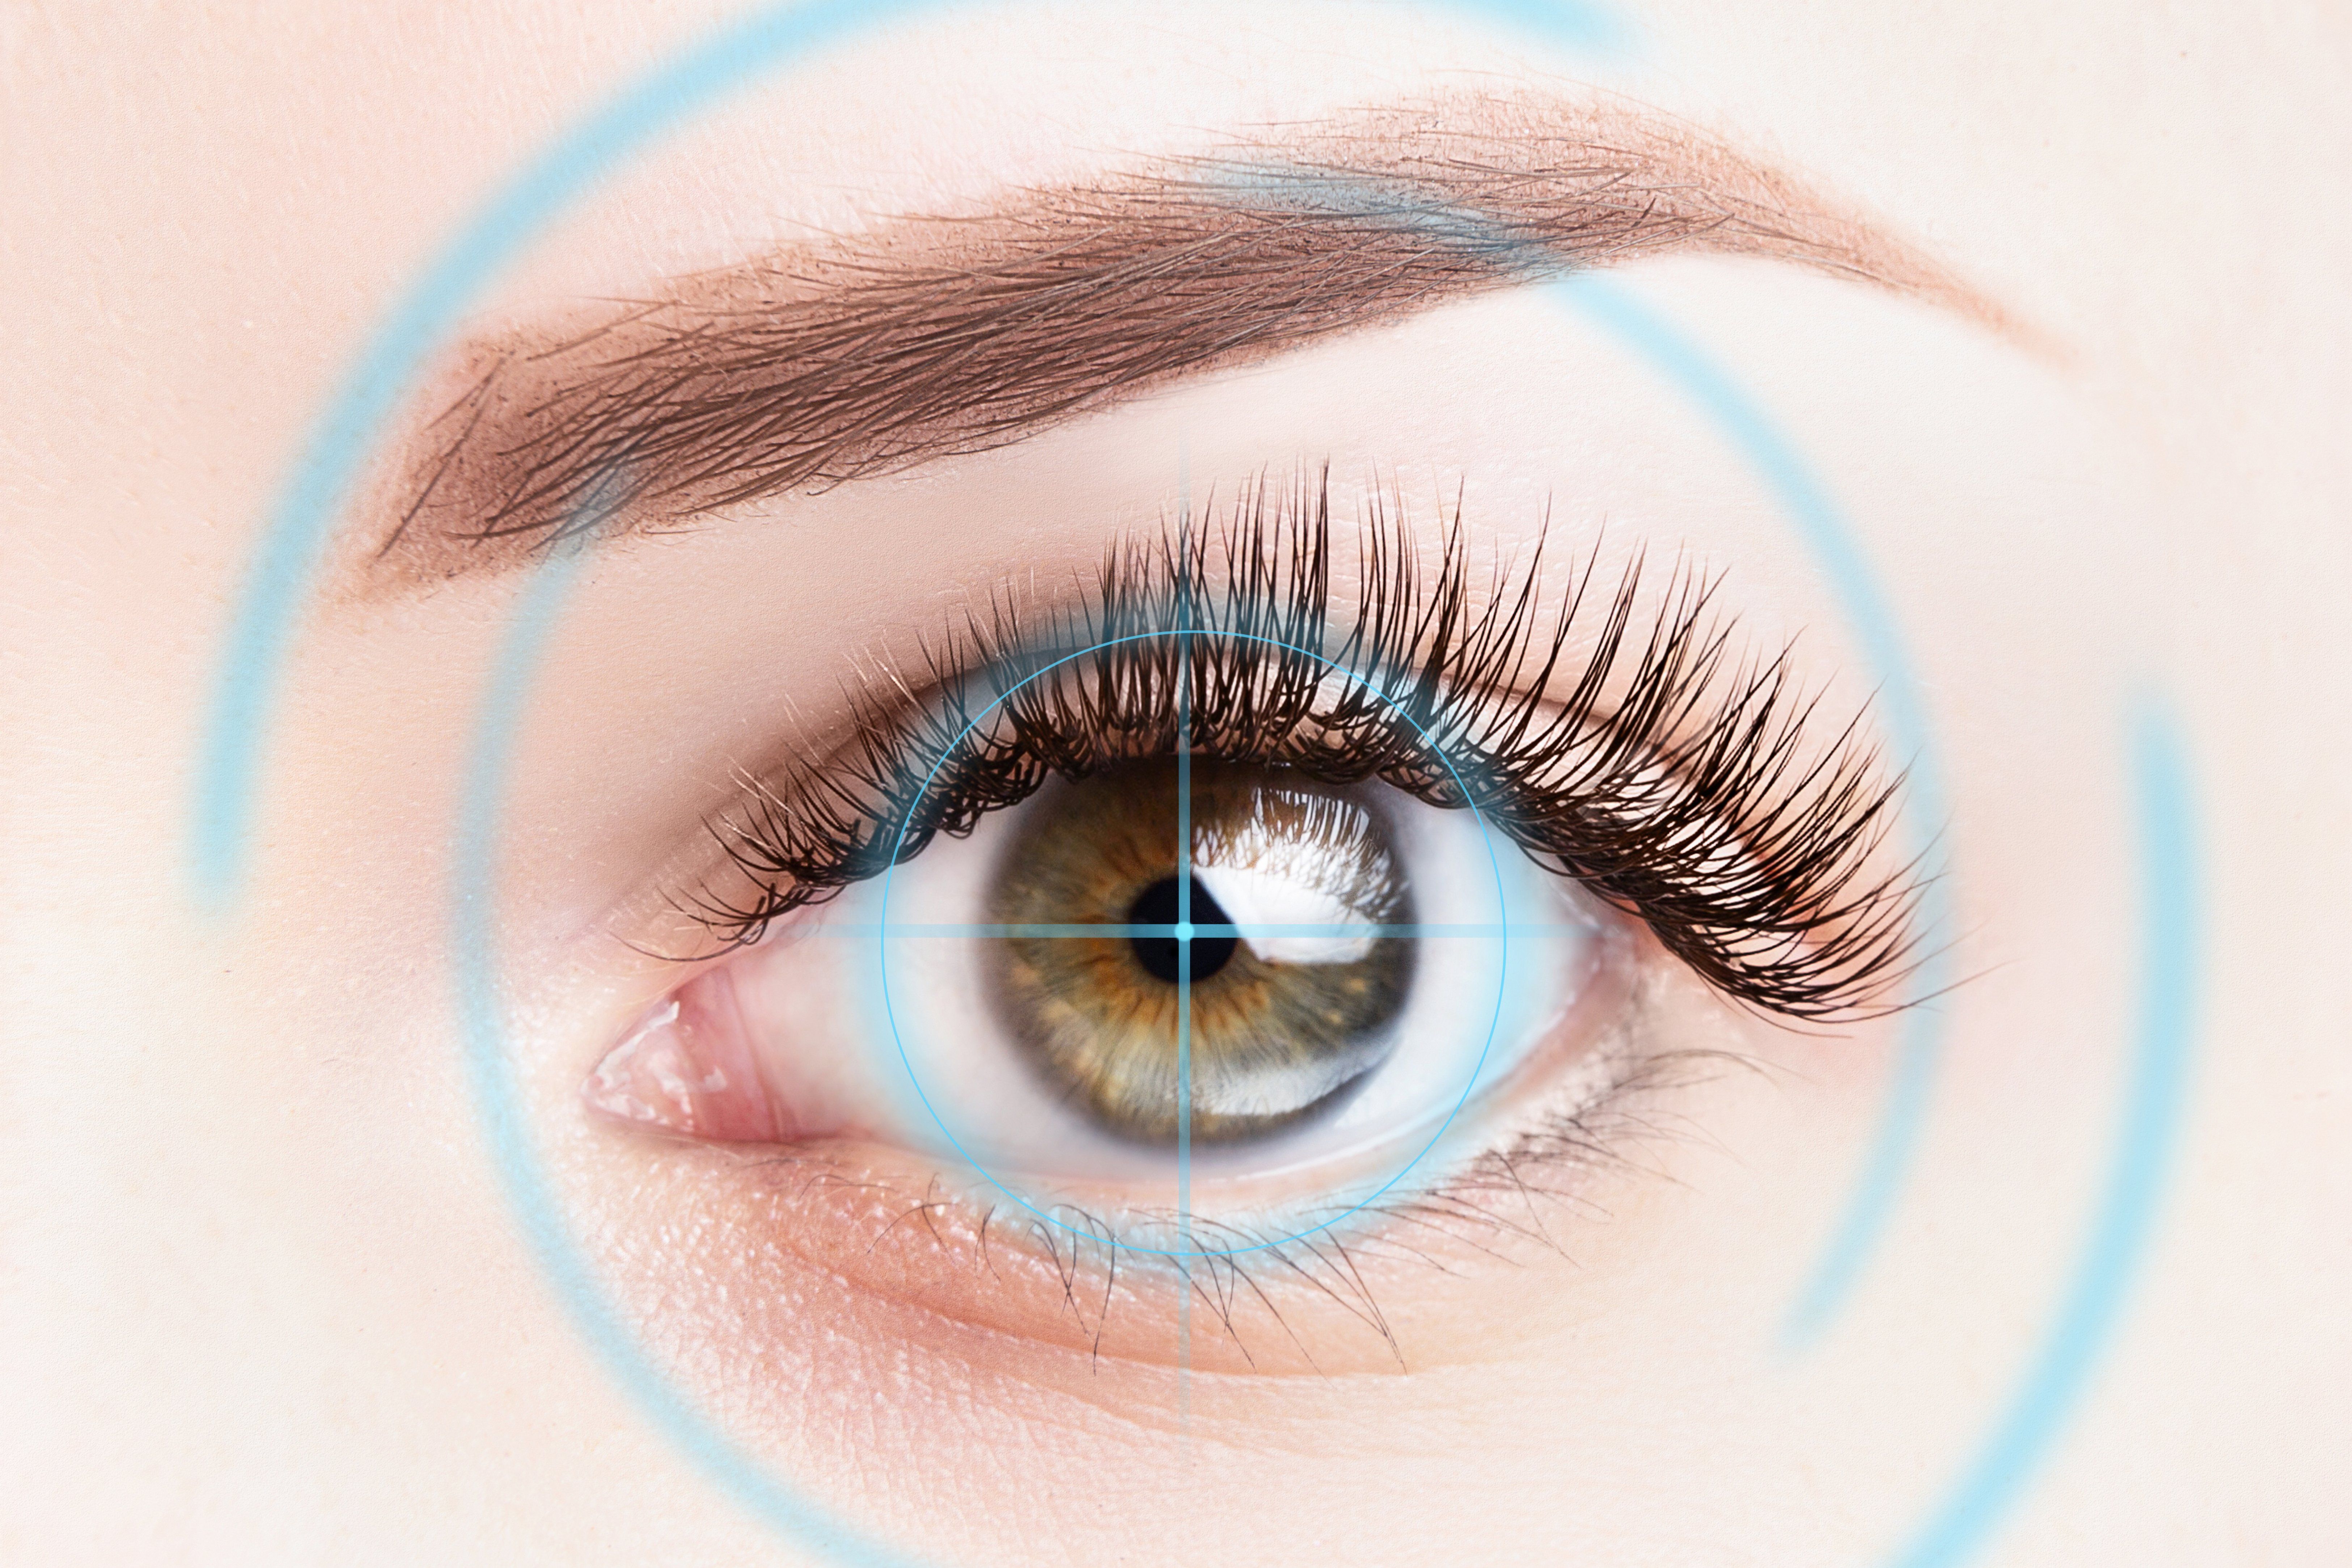 Is Lens Replacement the Same As Cataract Surgery?